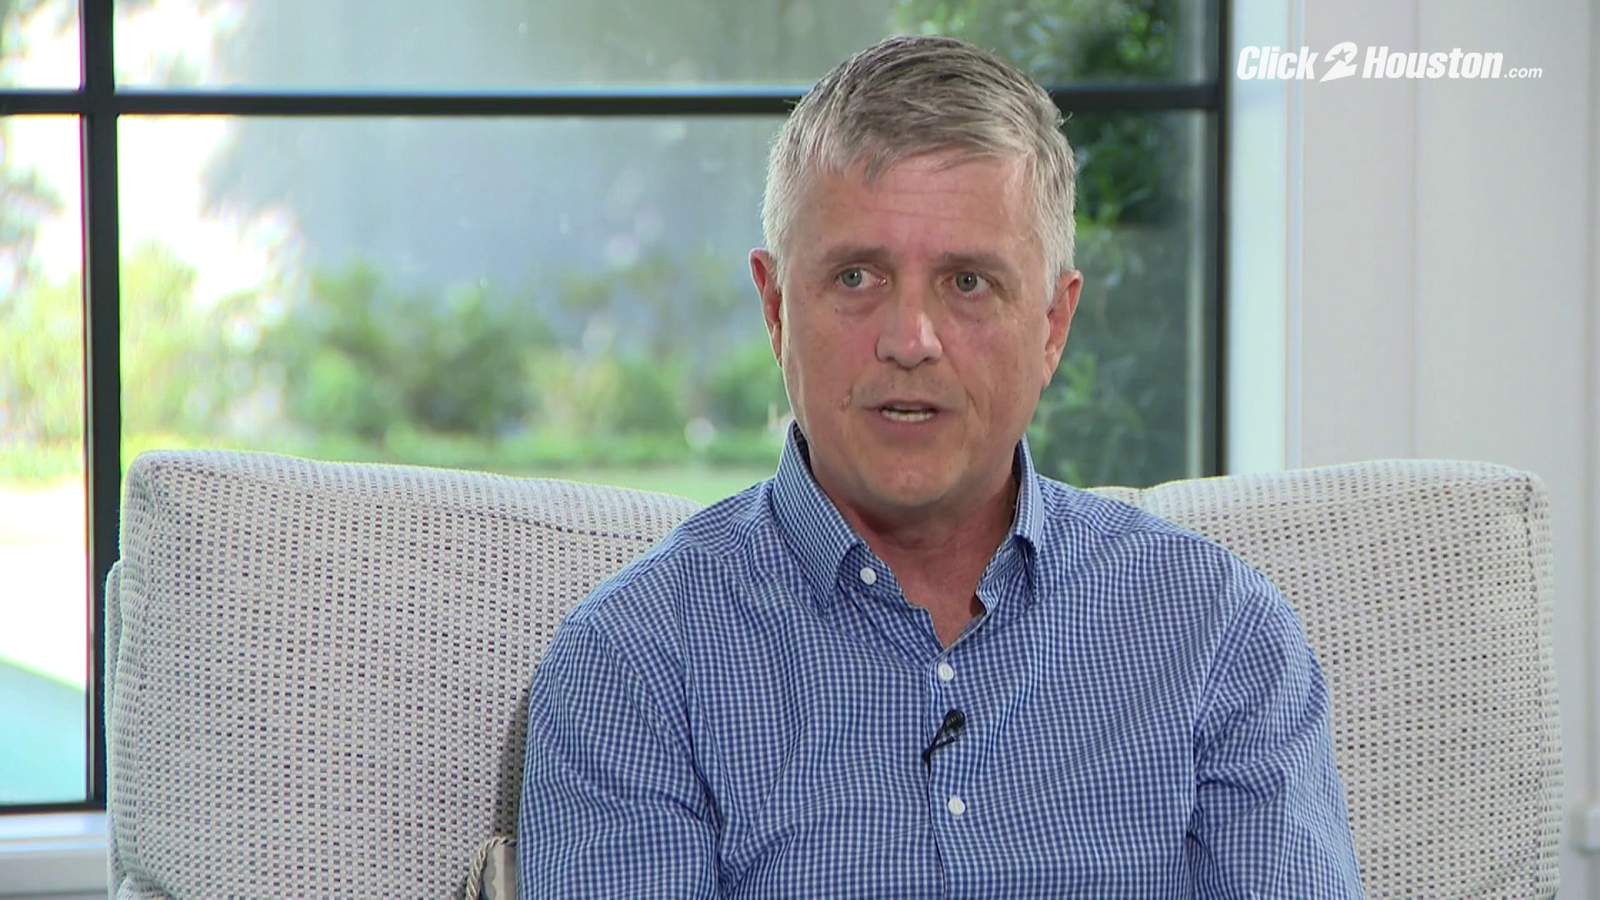 Former Astros GM Jeff Luhnow discusses Brandon Taubman scandal that preceded cheating revelation